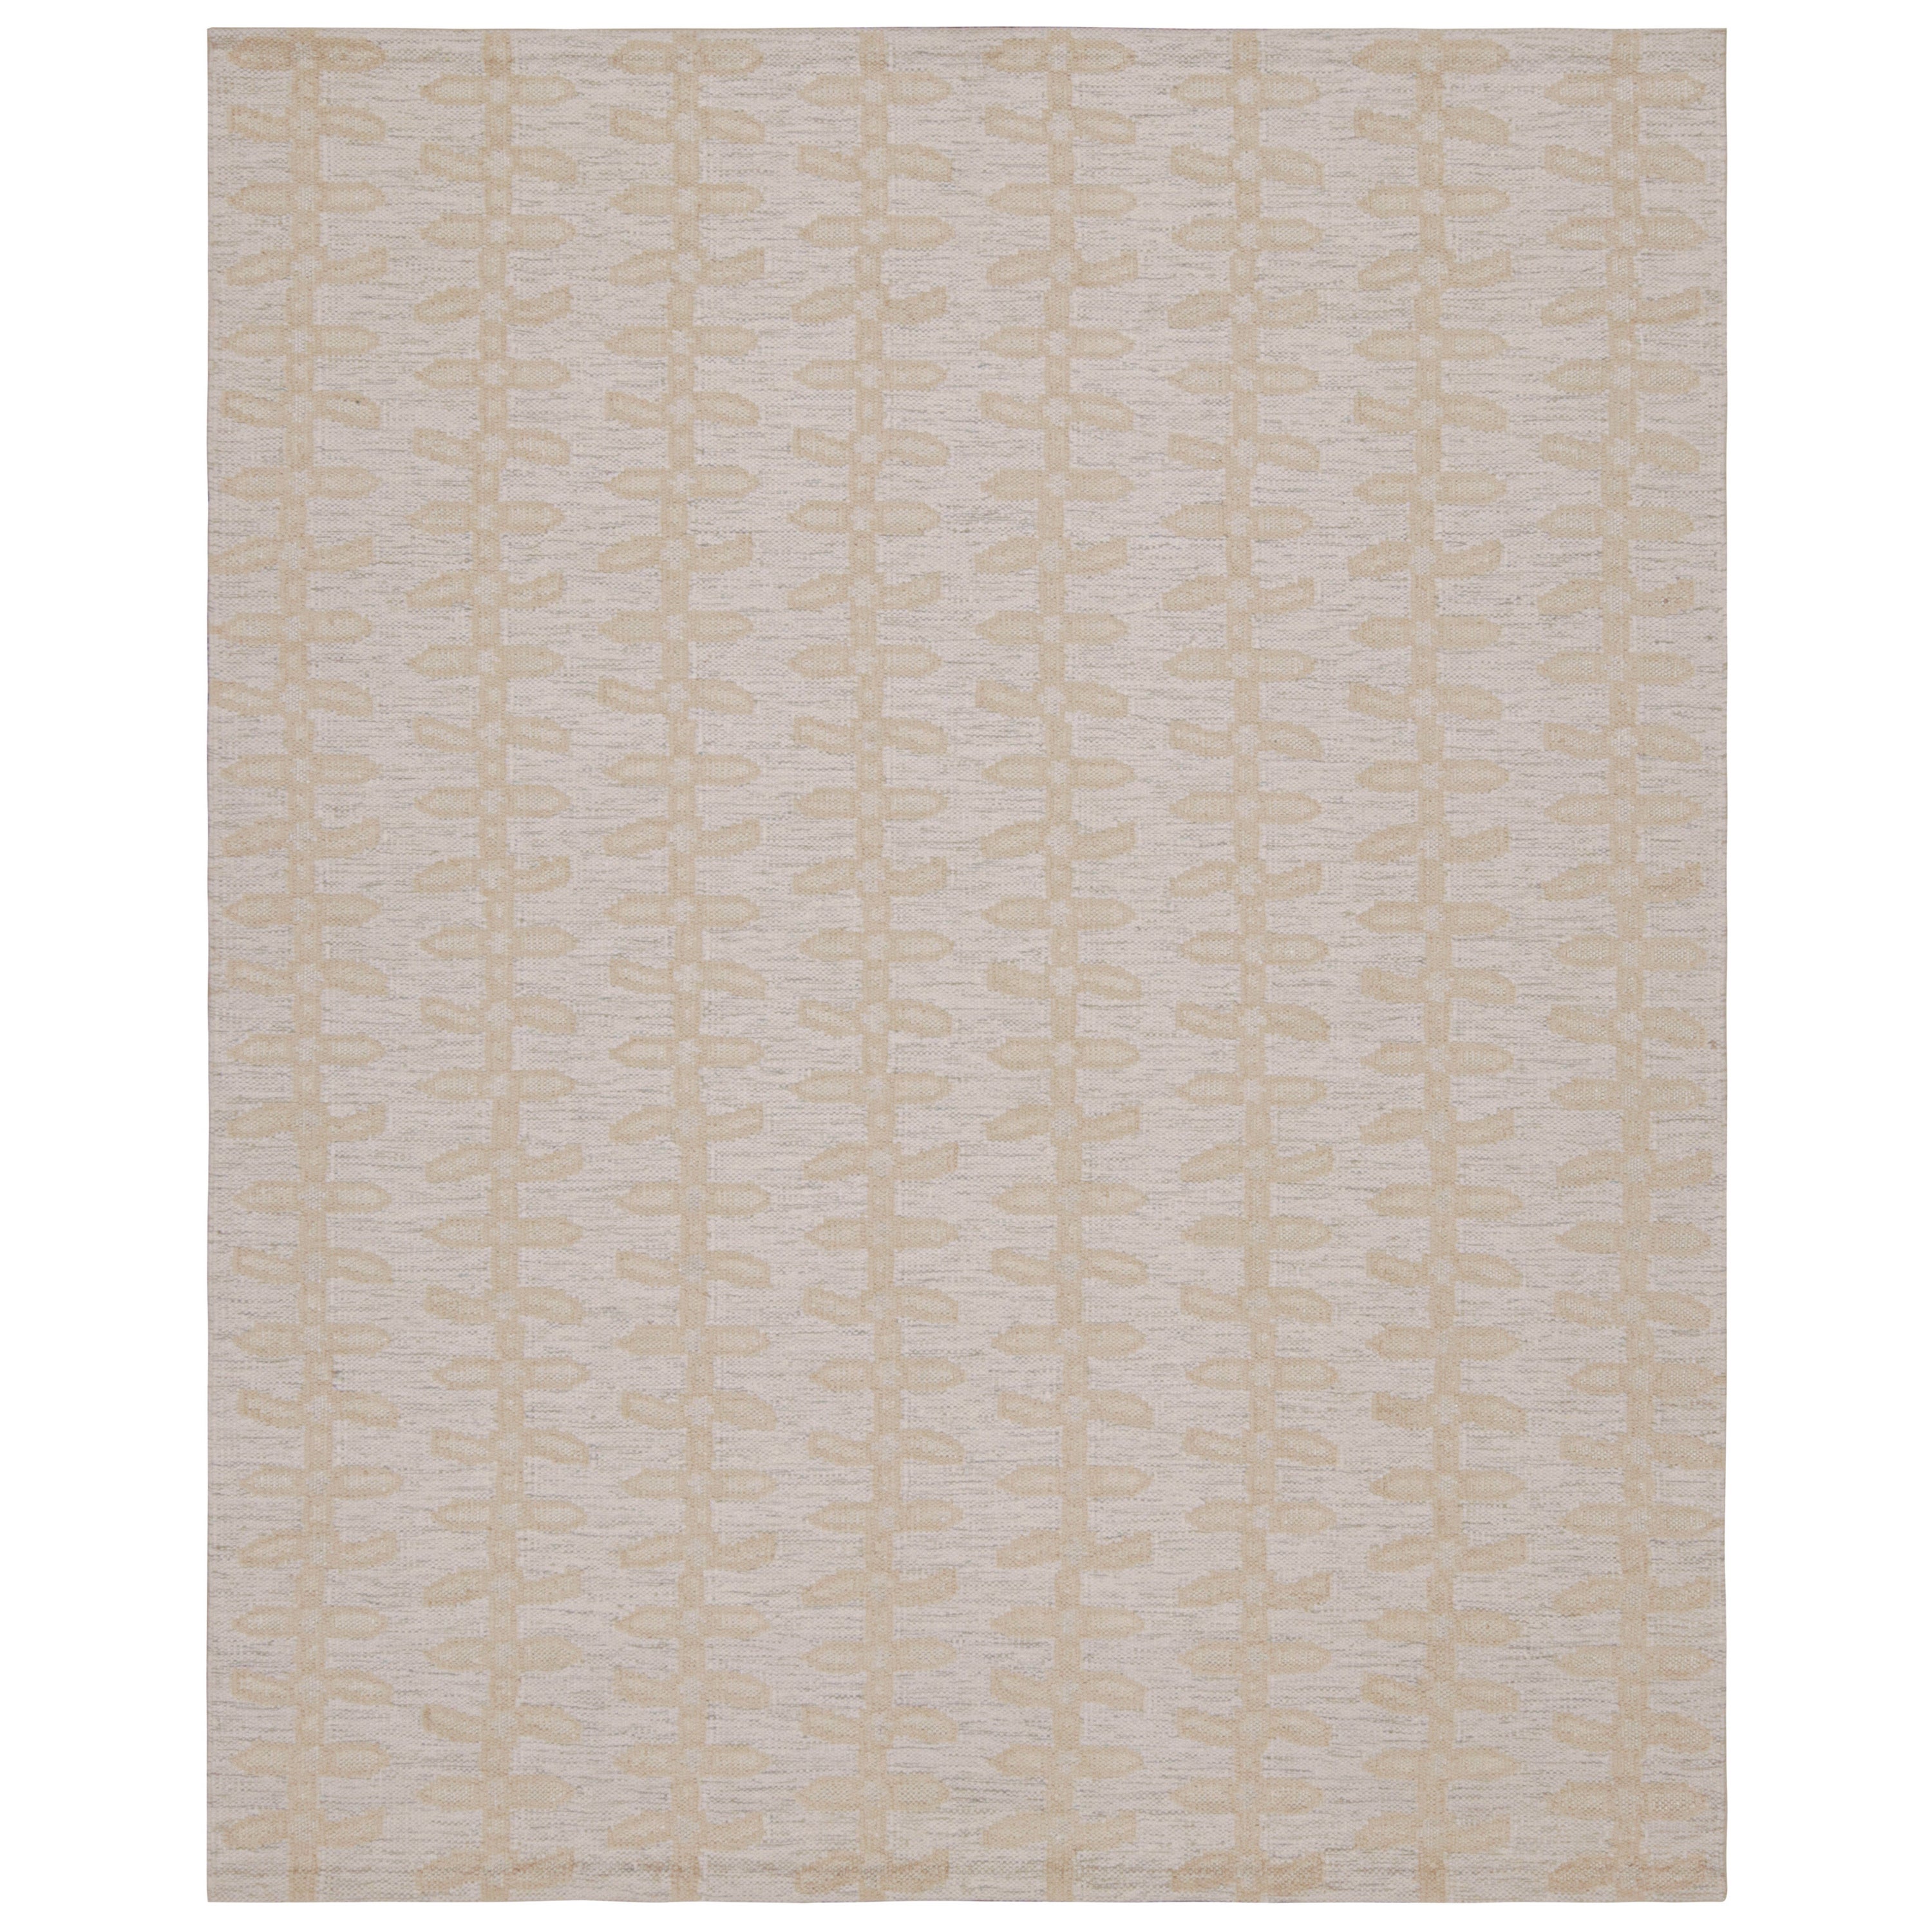 Rug & Kilim’s Scandinavian Style Kilim Rug with Beige & Gray Floral Patterns For Sale